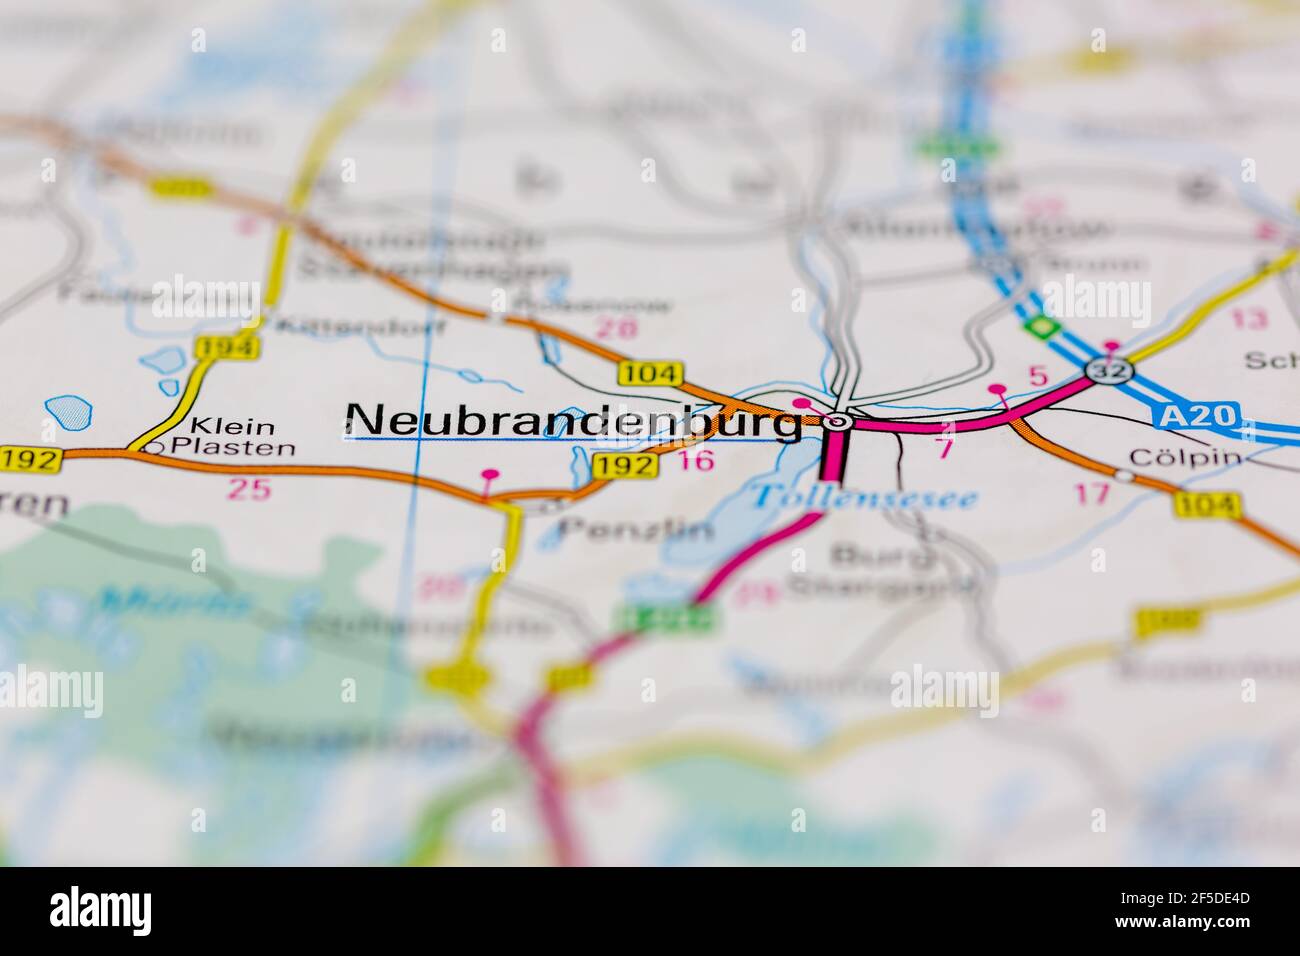 Neubrandenburg and surrounding areas Shown on a Geography map or road map Stock Photo